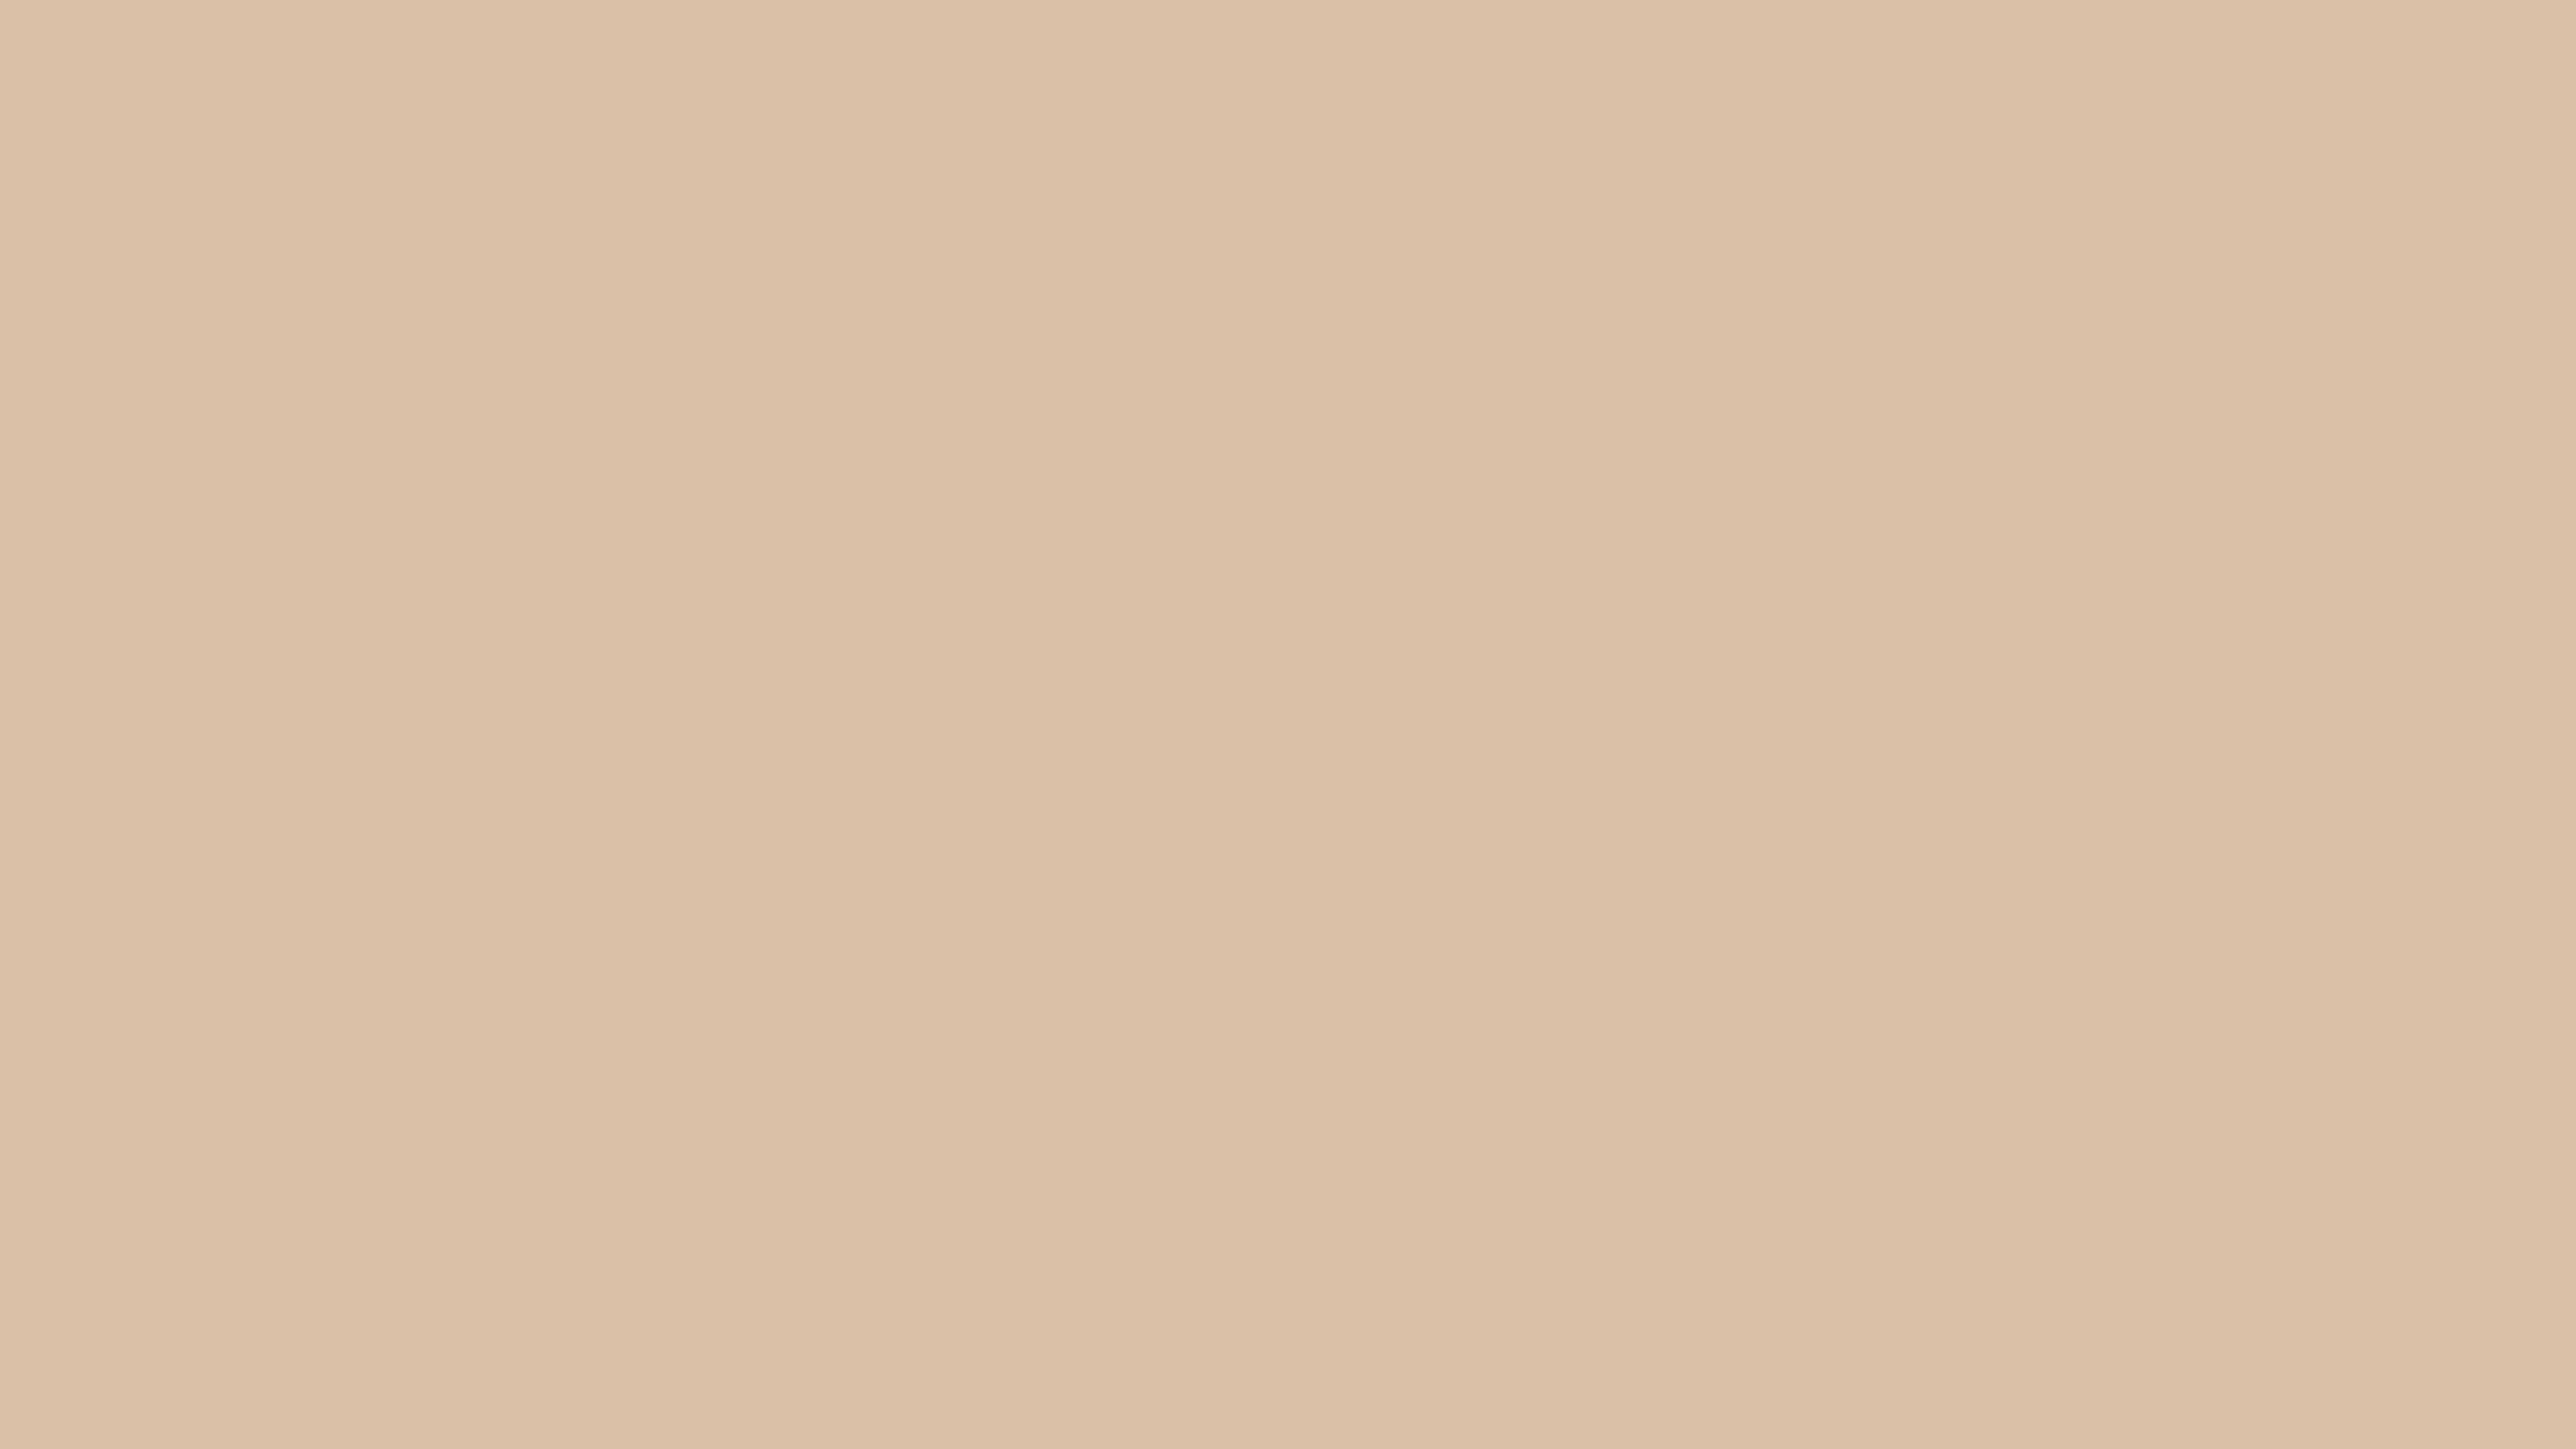 Ivory Cream Solid Color Background Image | Free Image Generator